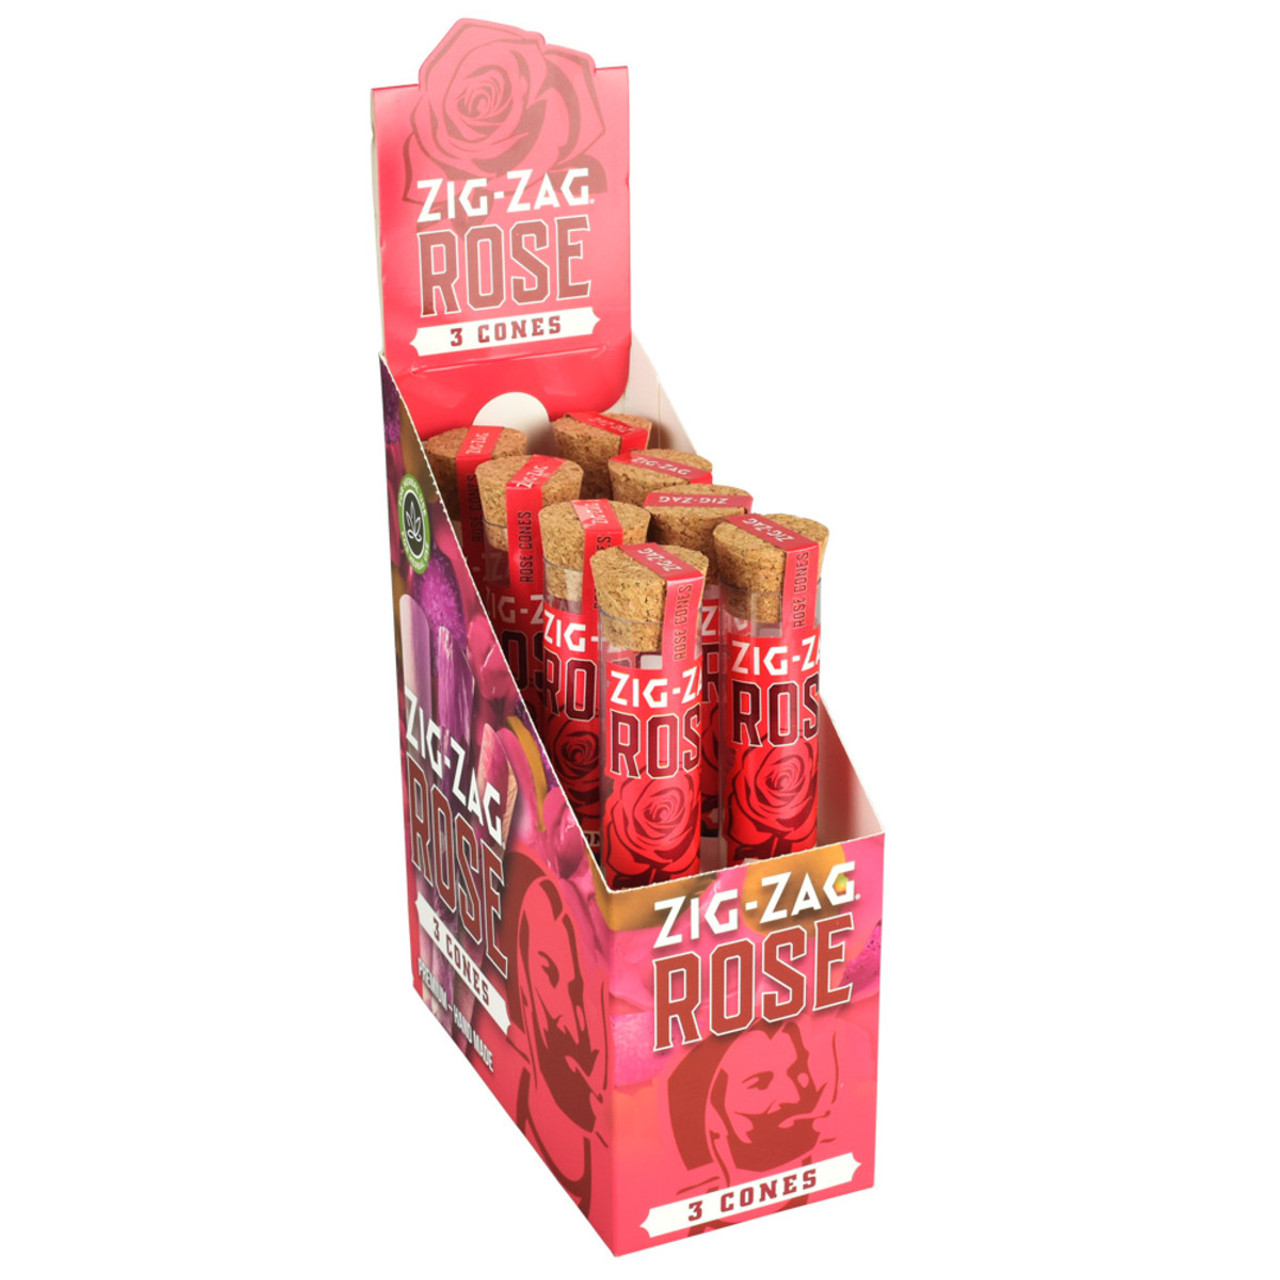 Zig Zag Pre-Rolled Cone Blunt Wraps (2-Pack)